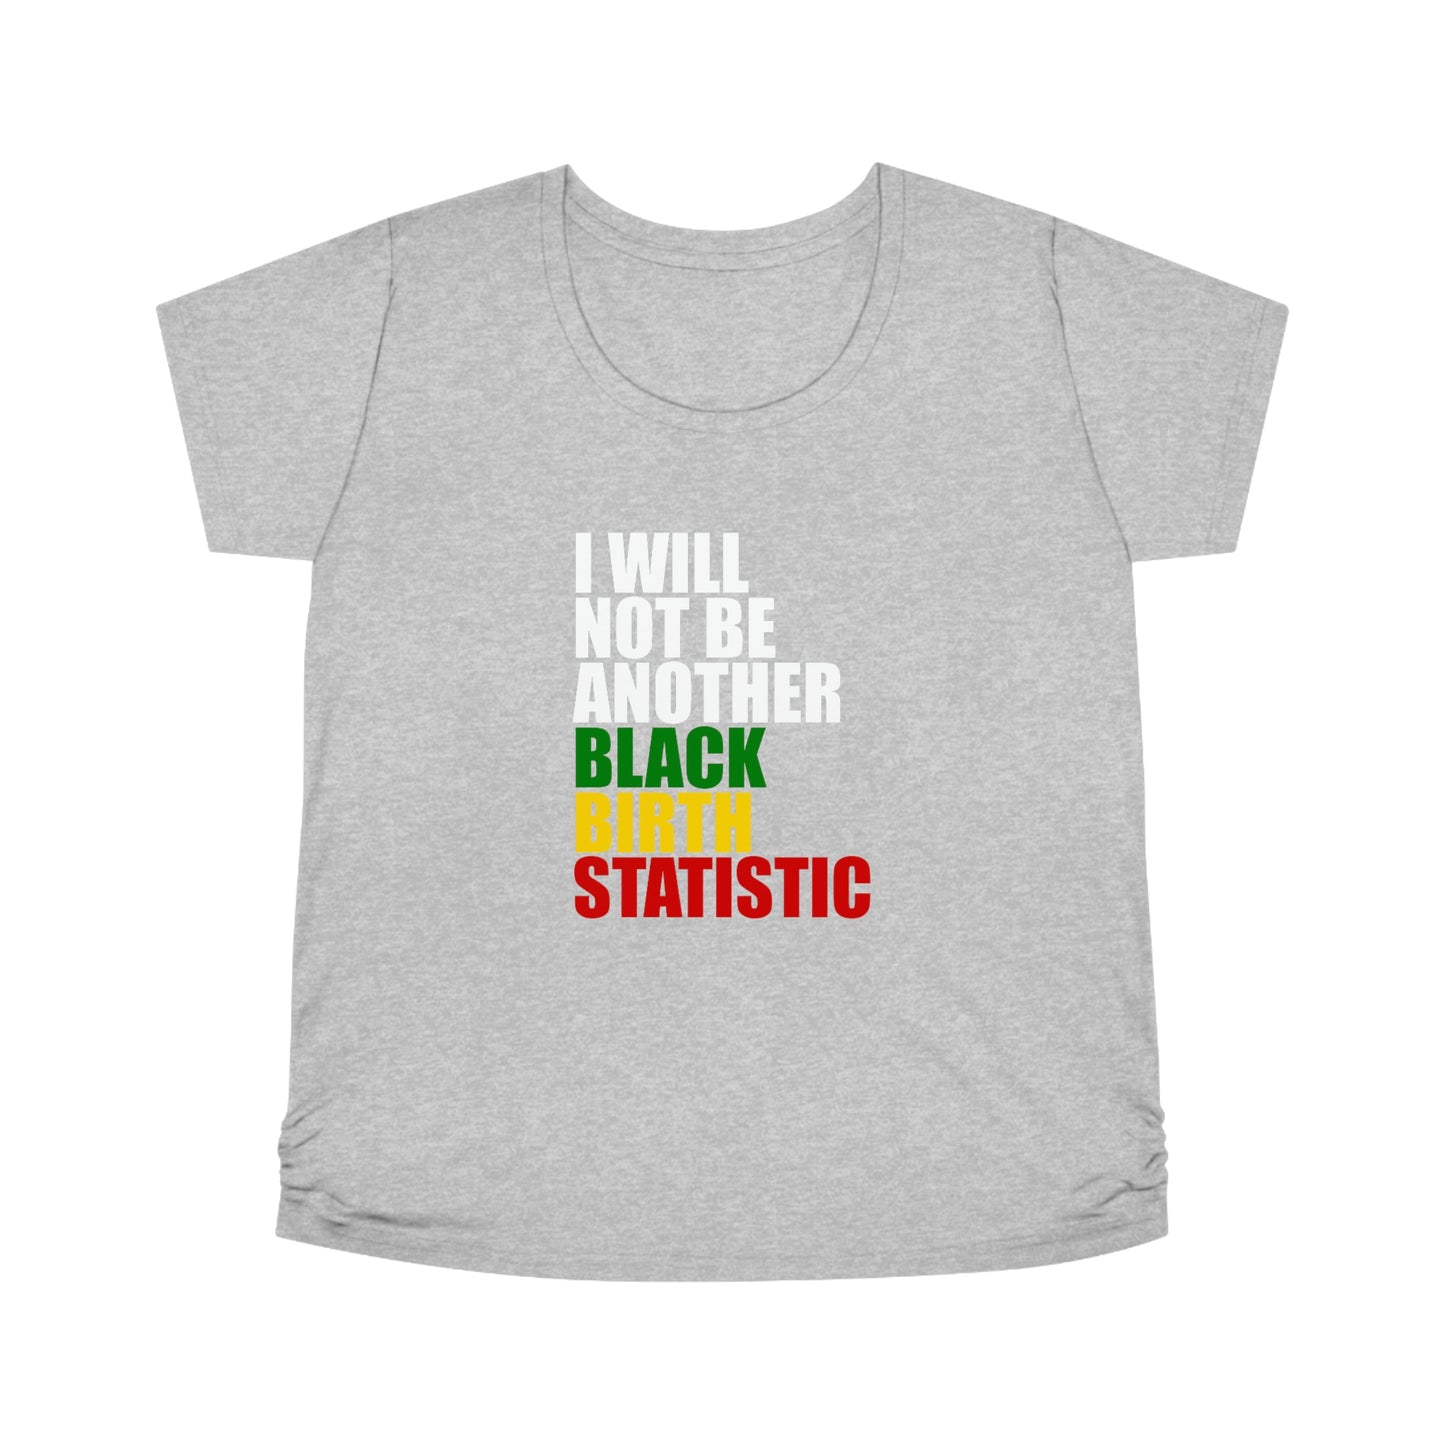 I WILL NOT BE ANOTHER BLACK BIRTH STATISTIC